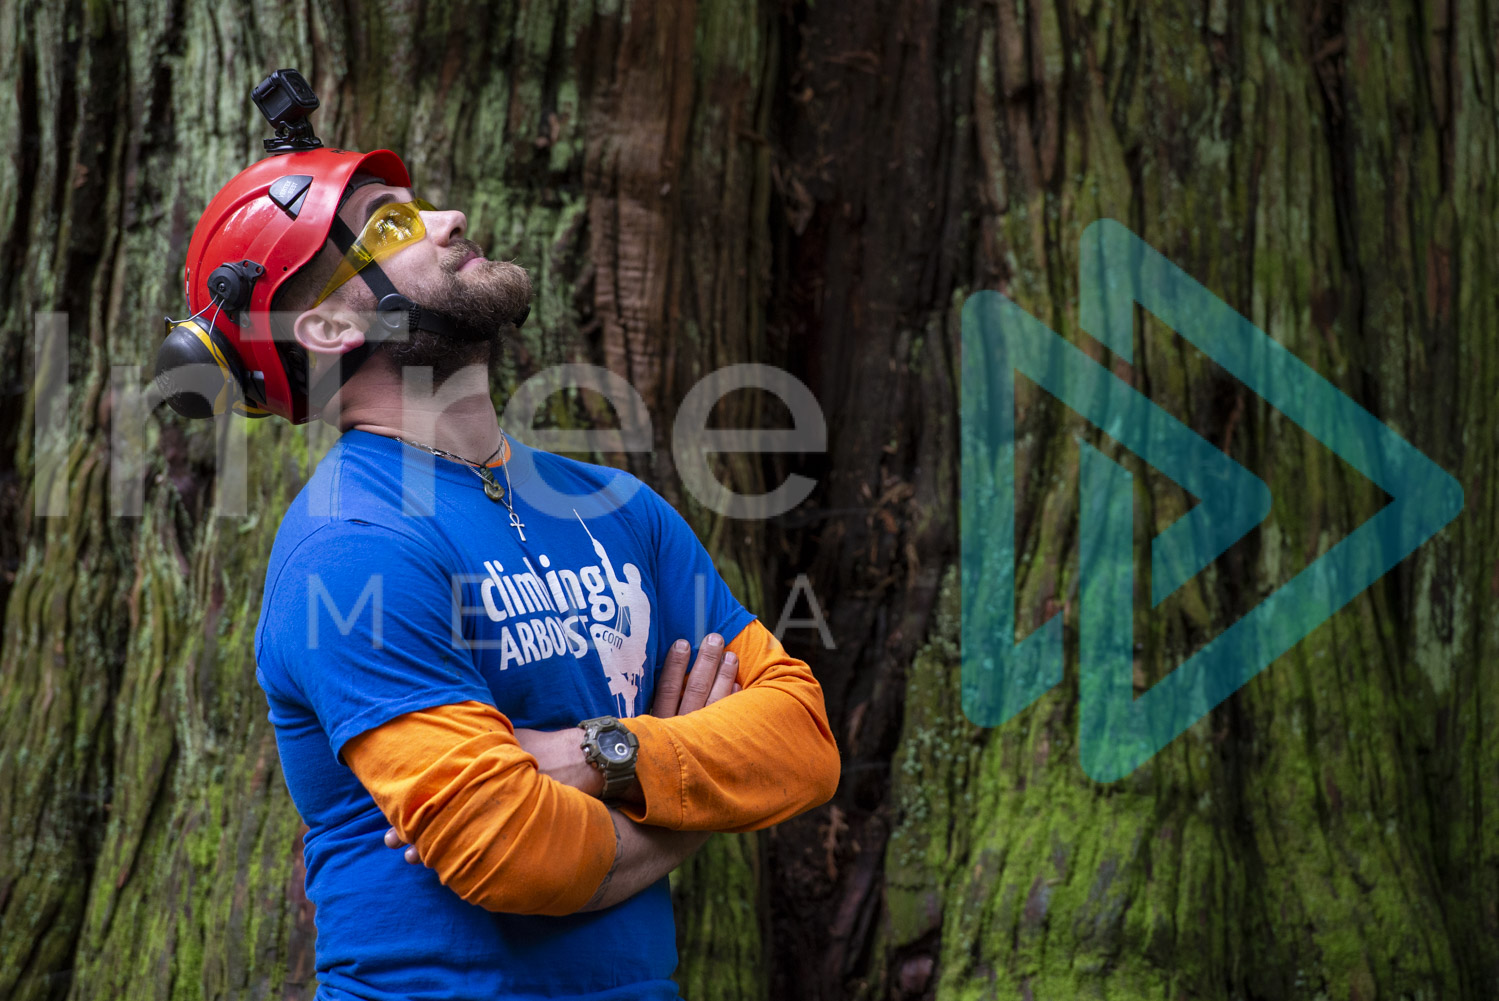 Male Climbing arborist with GoPro on helmet looking up into forest canopy - Arborist Stock Photo 001-21-6428